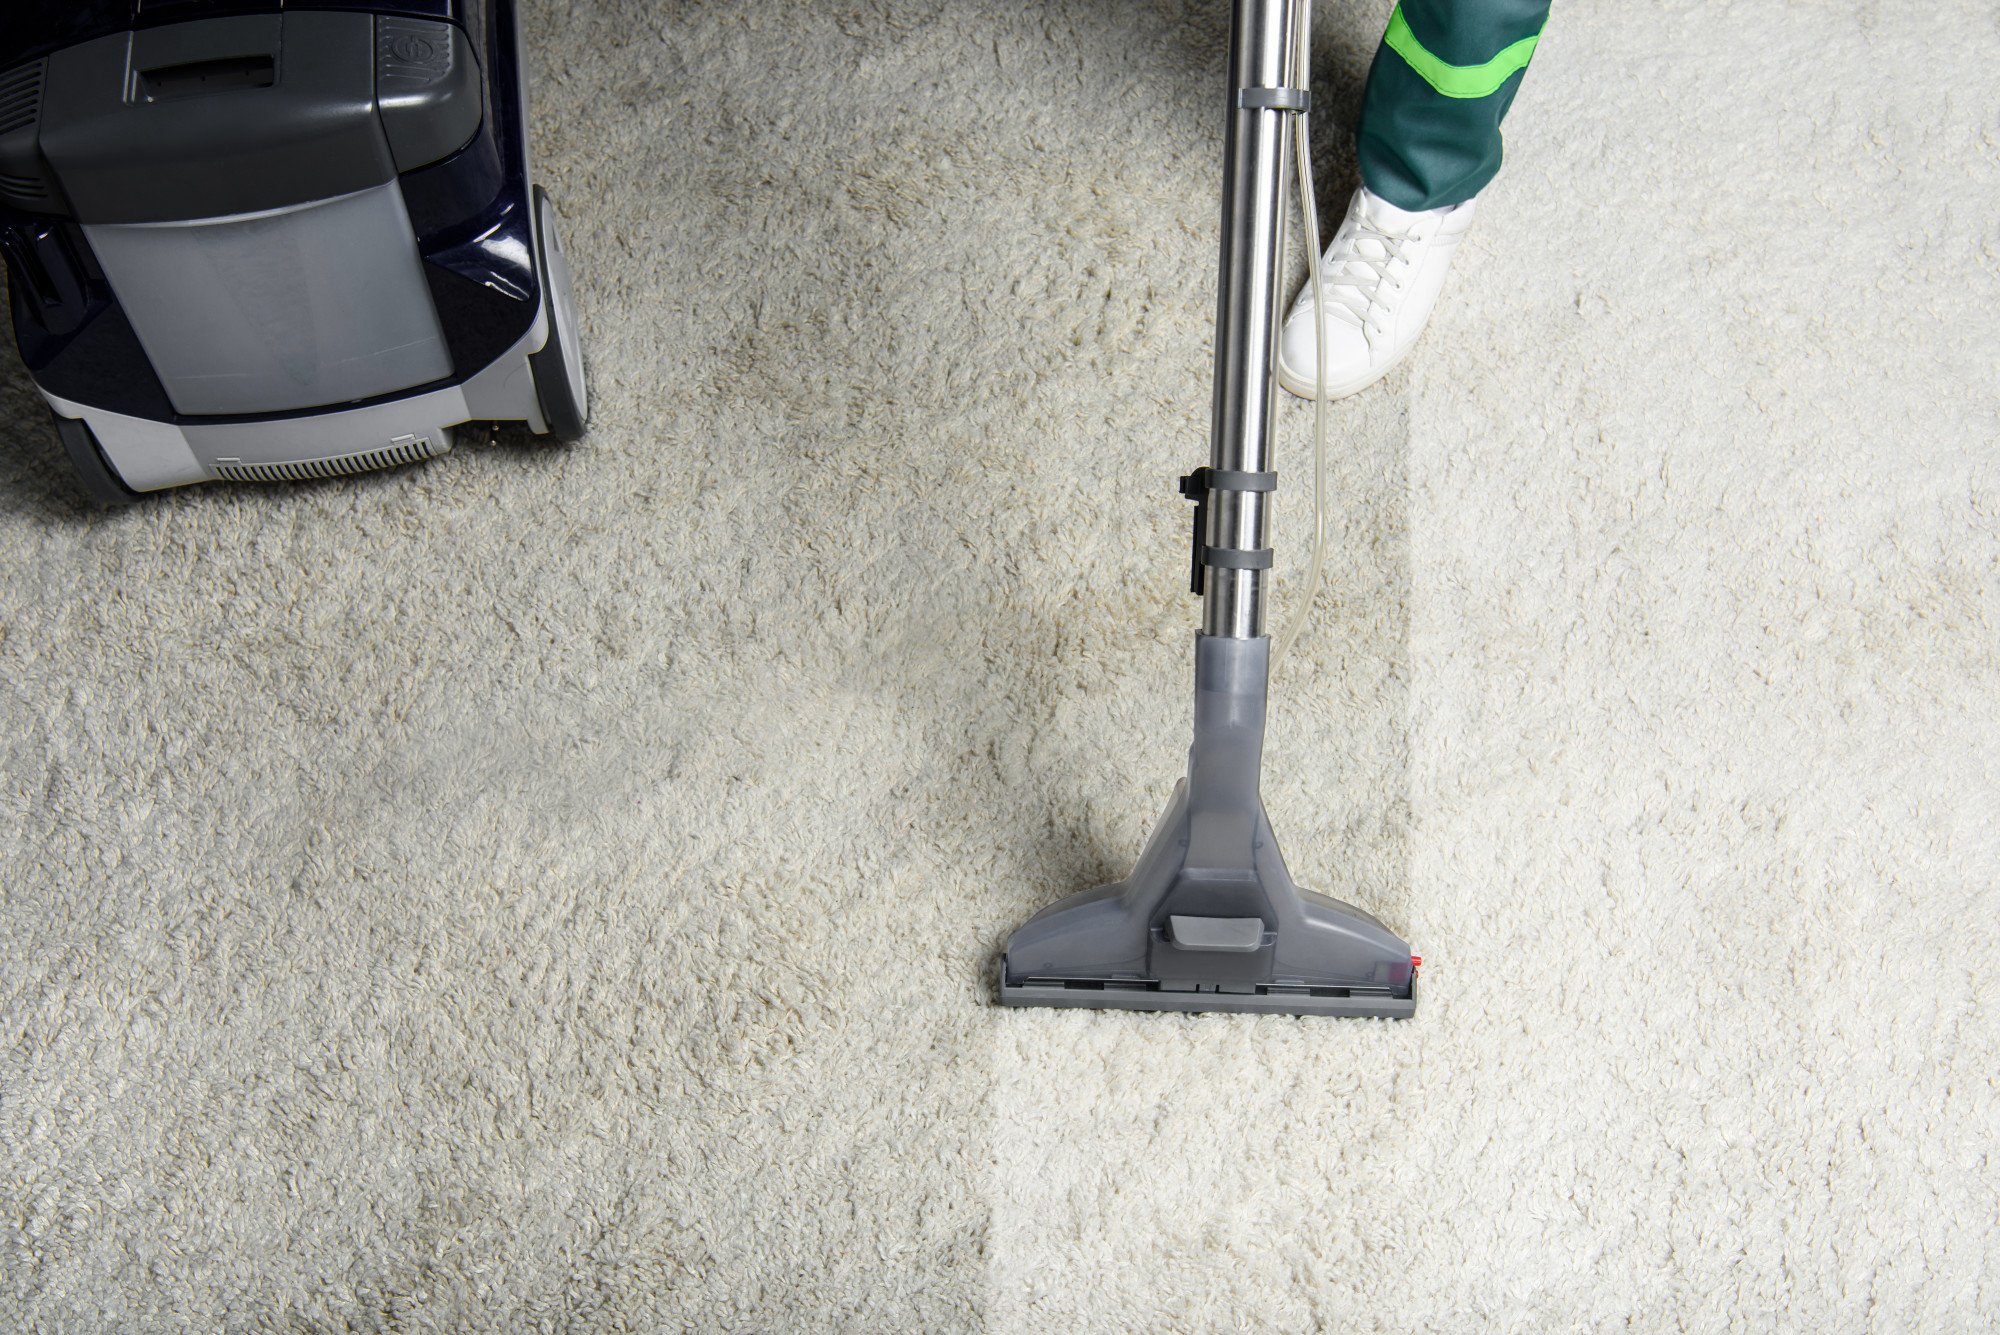 5 Tips For Finding The Best Carpet Cleaning Company